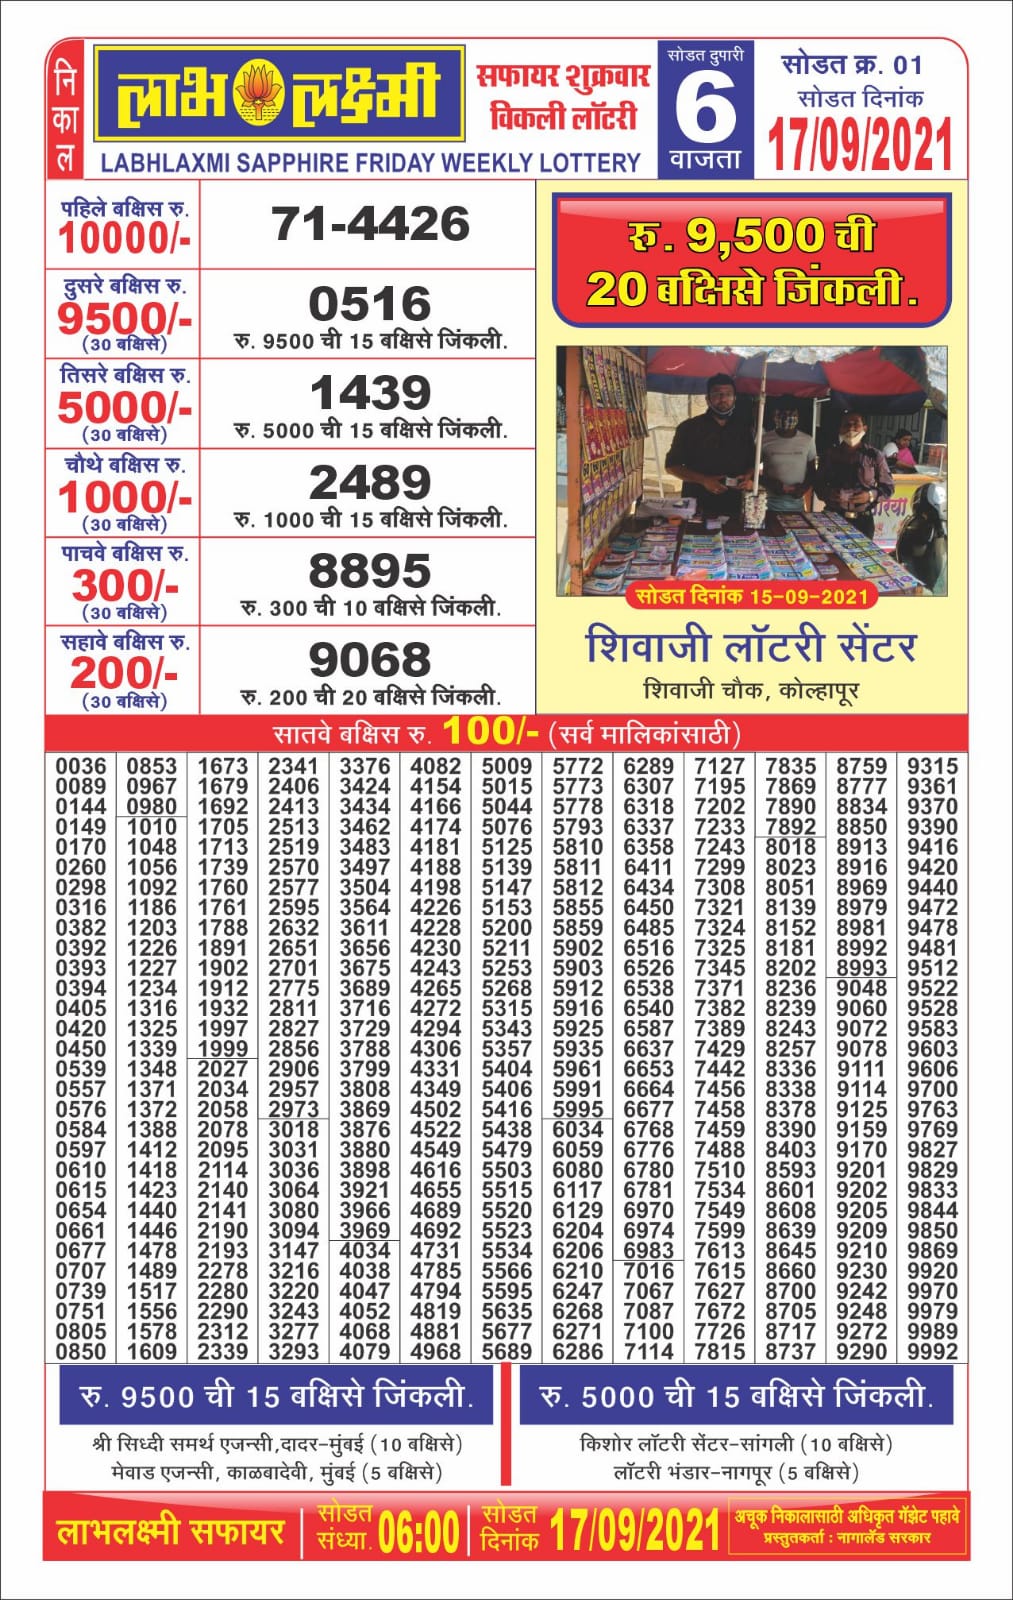 Labhlaxmi 6PM lottery result 17-09-2021